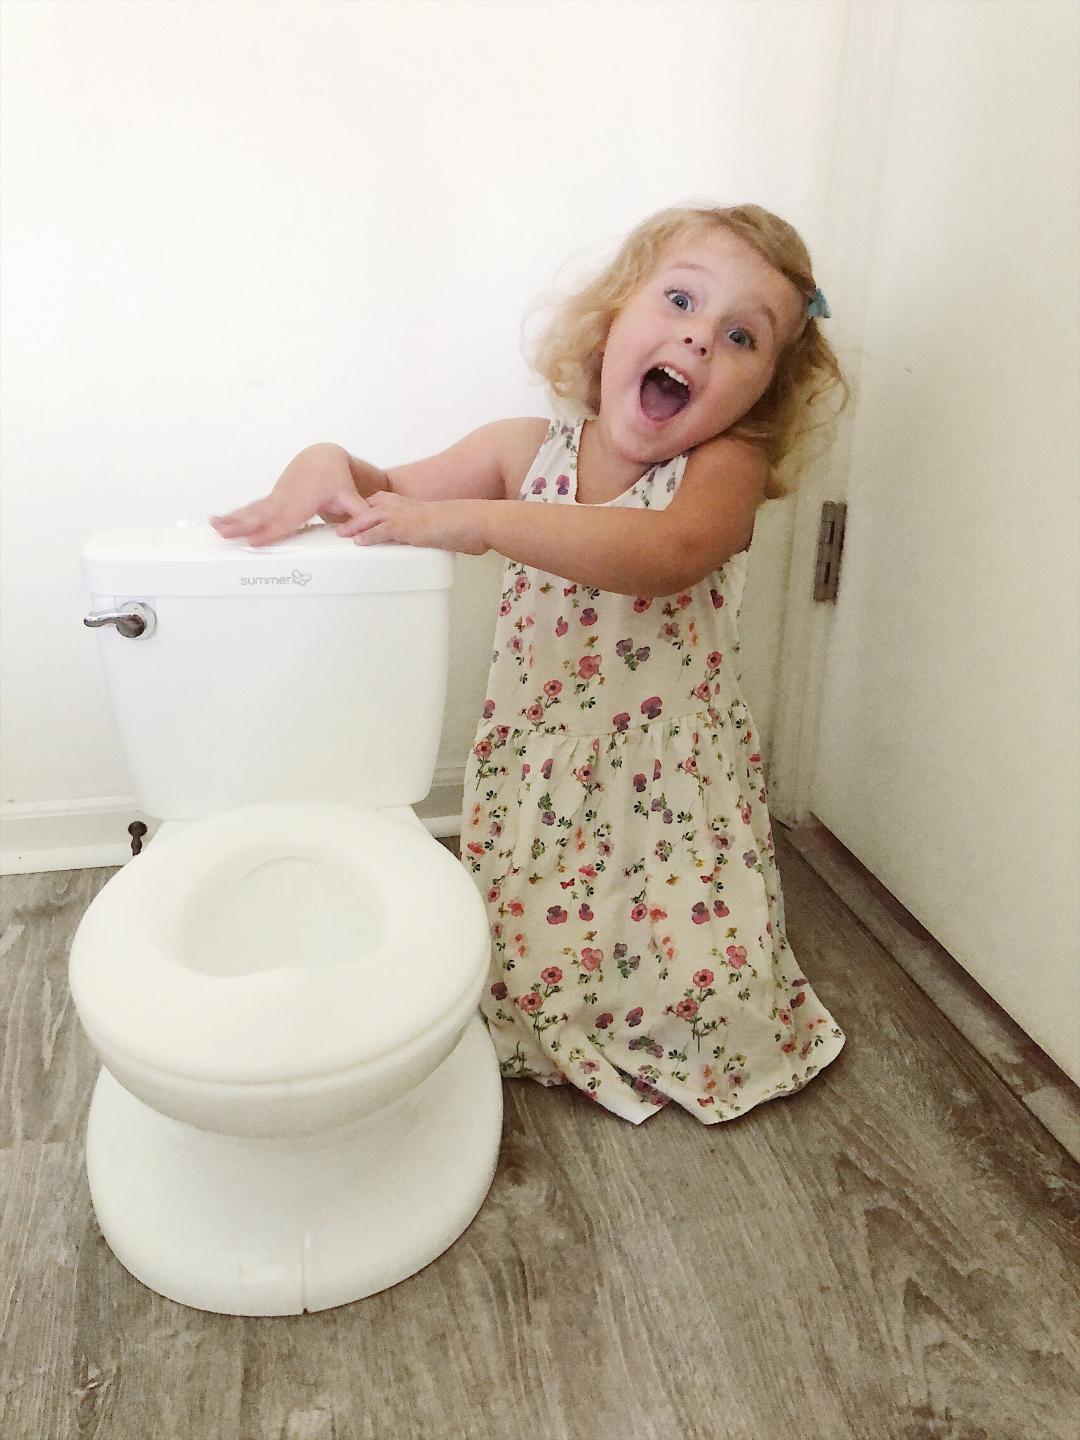 Toddlers Who Are Late Potty Trainers